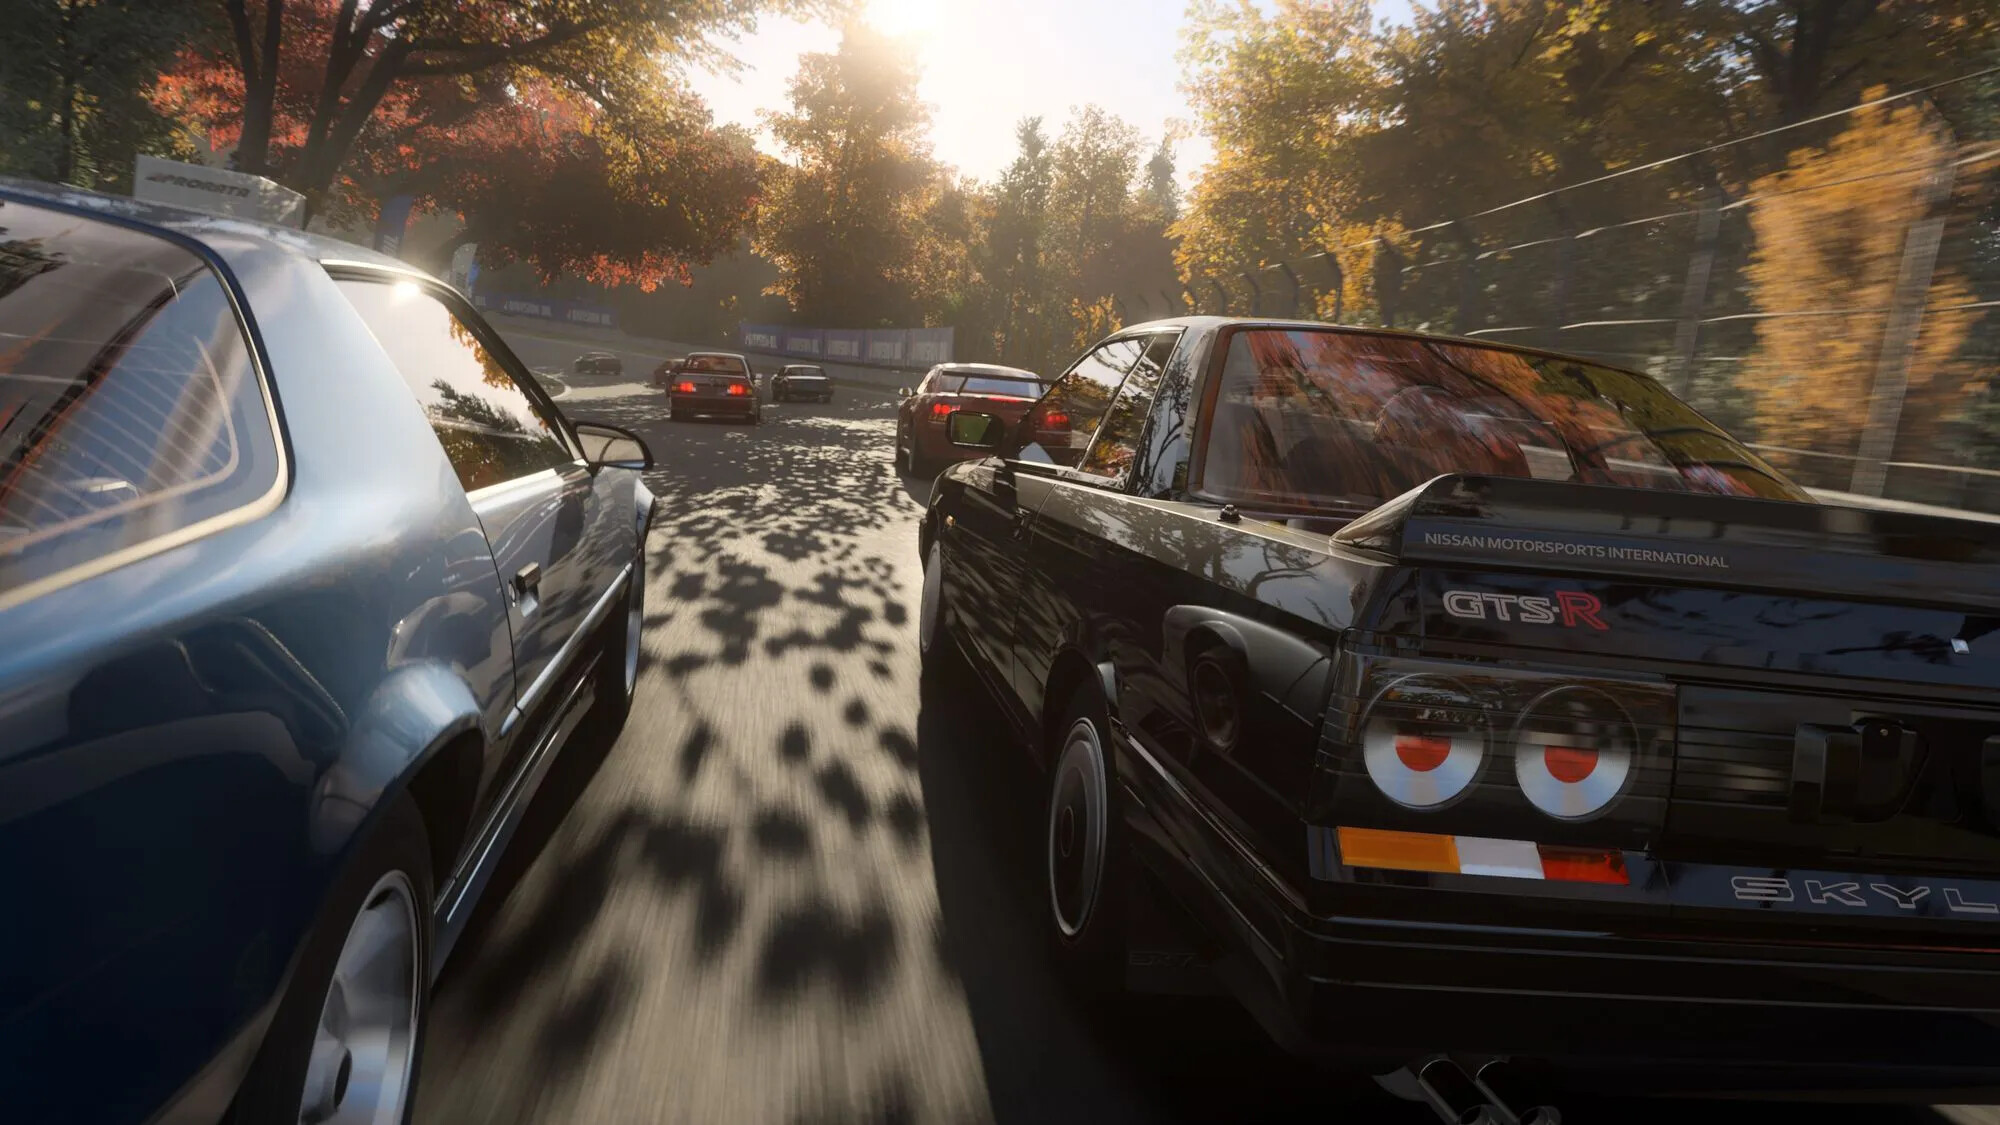 Forza Motorsport early access, release dates, and download size